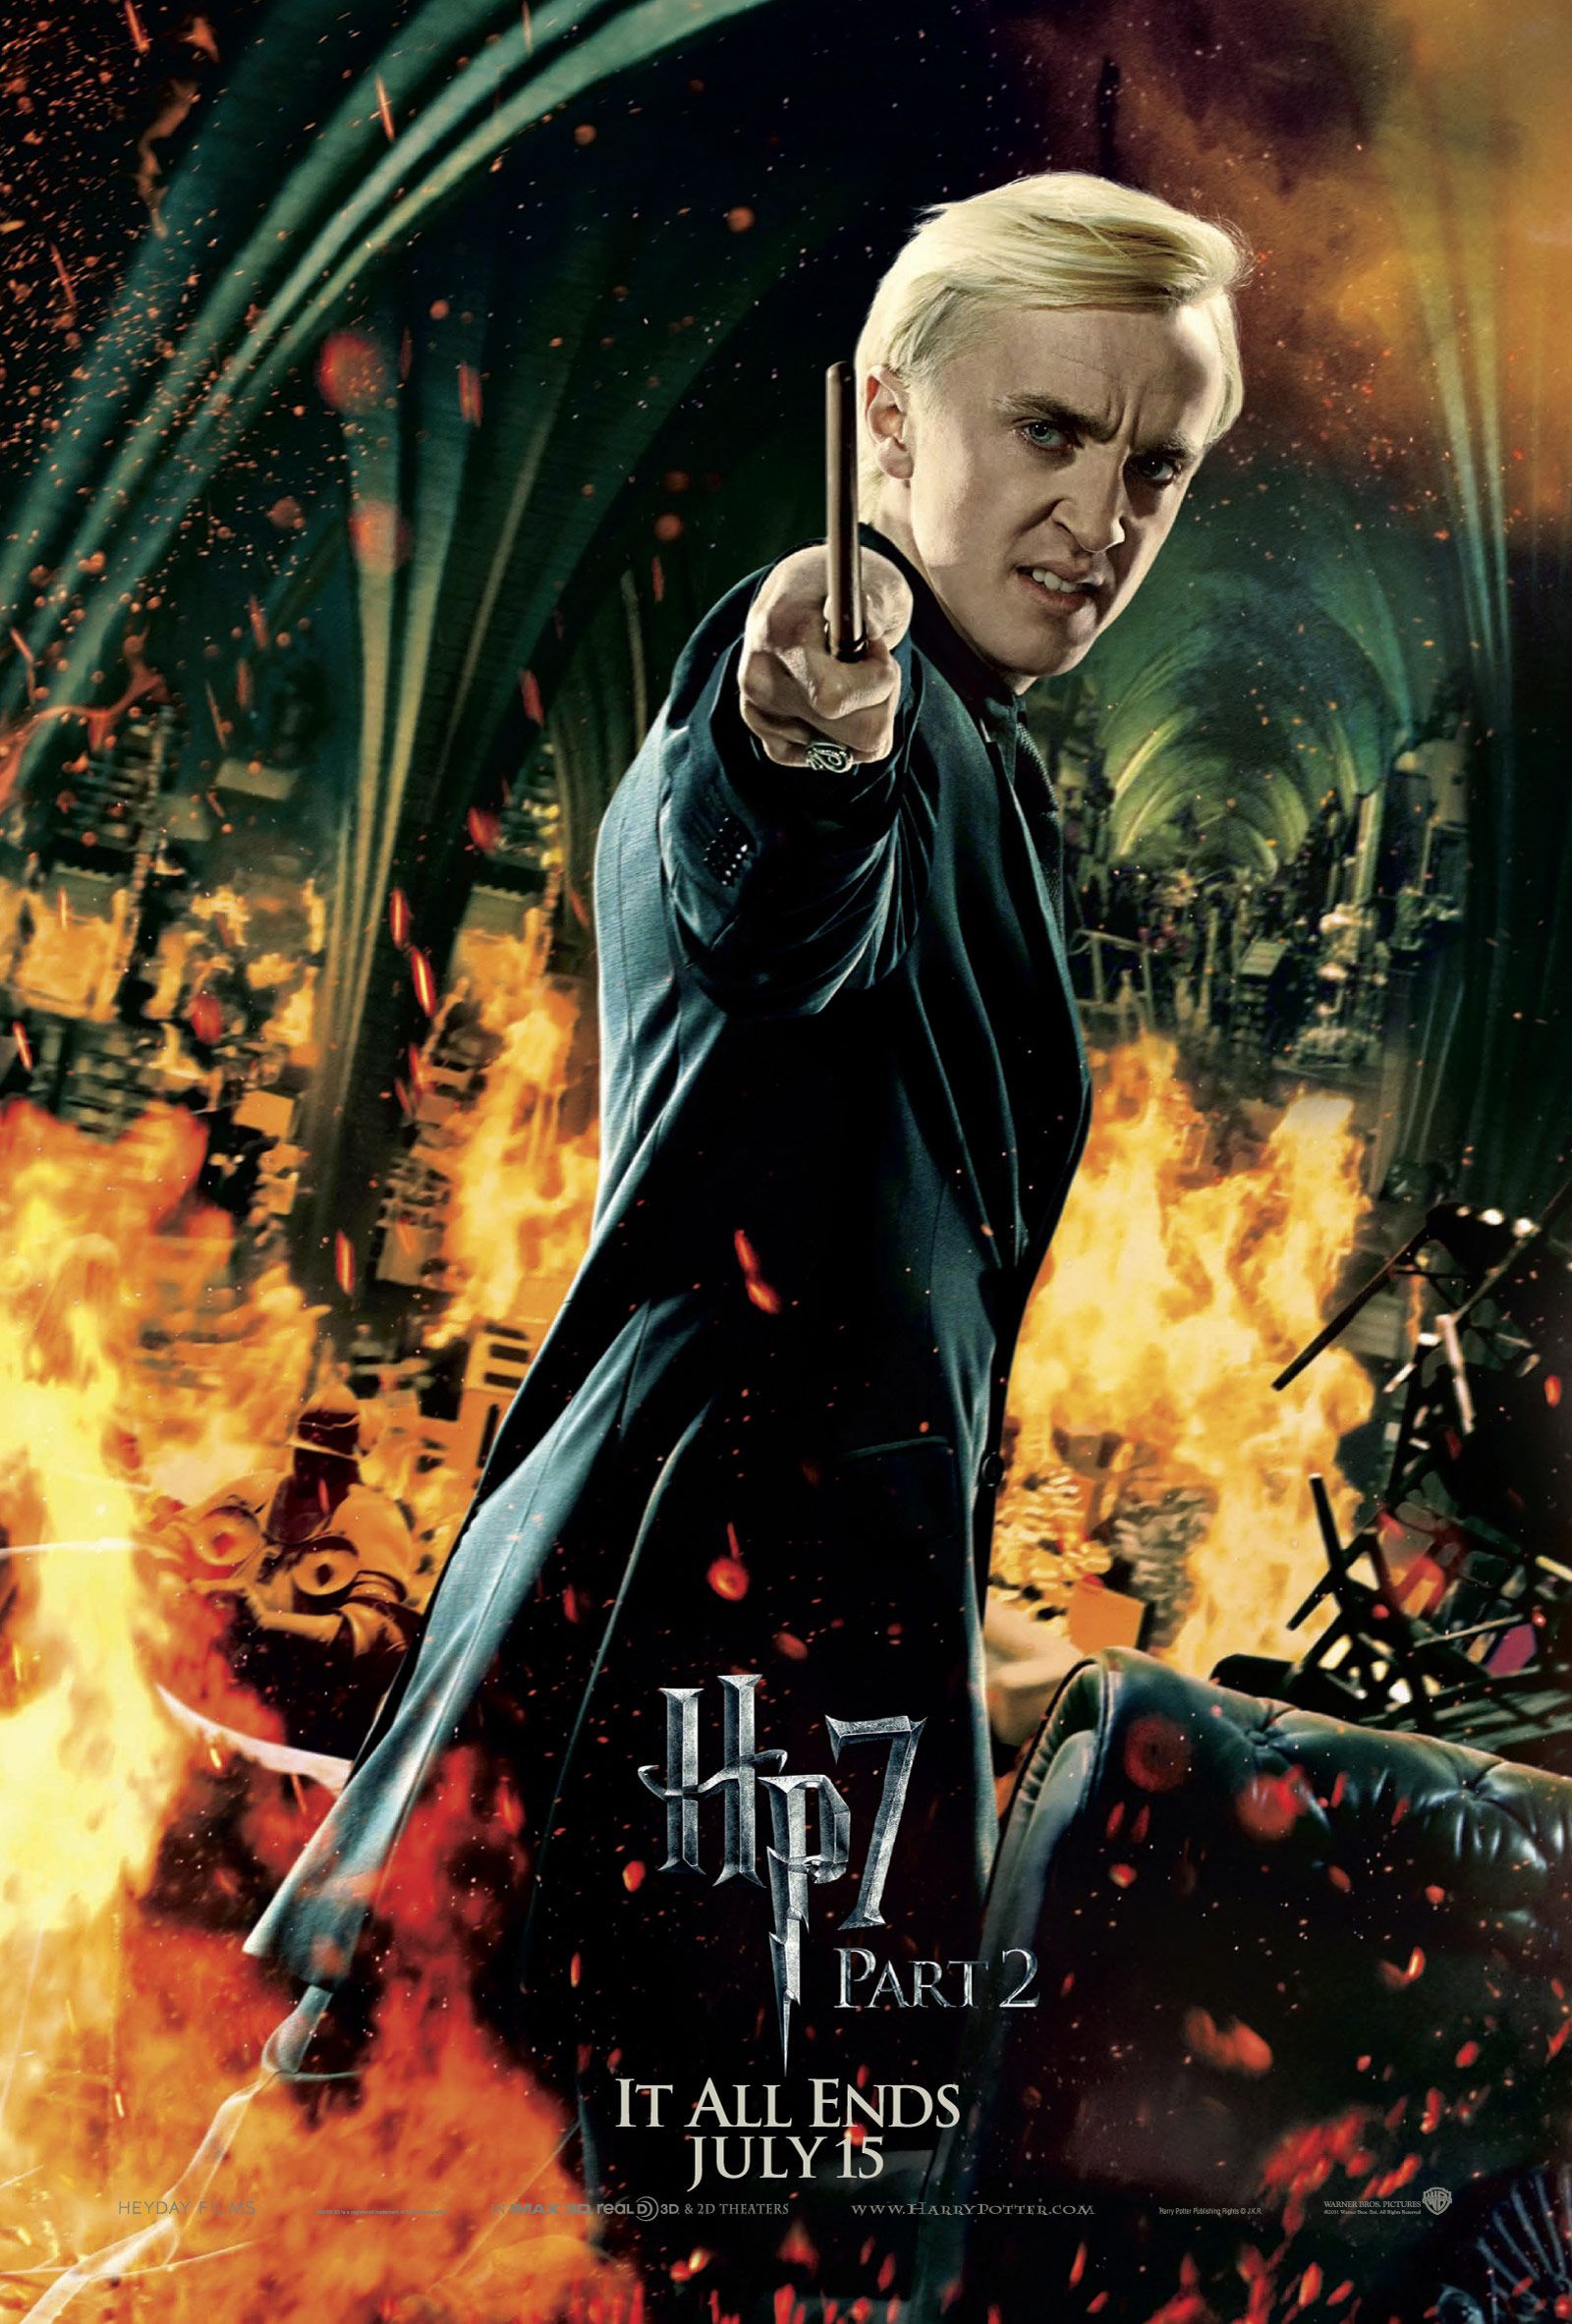 Harry Potter and the Deathly Hallows - Part 2 Draco Malfoy Character Poster